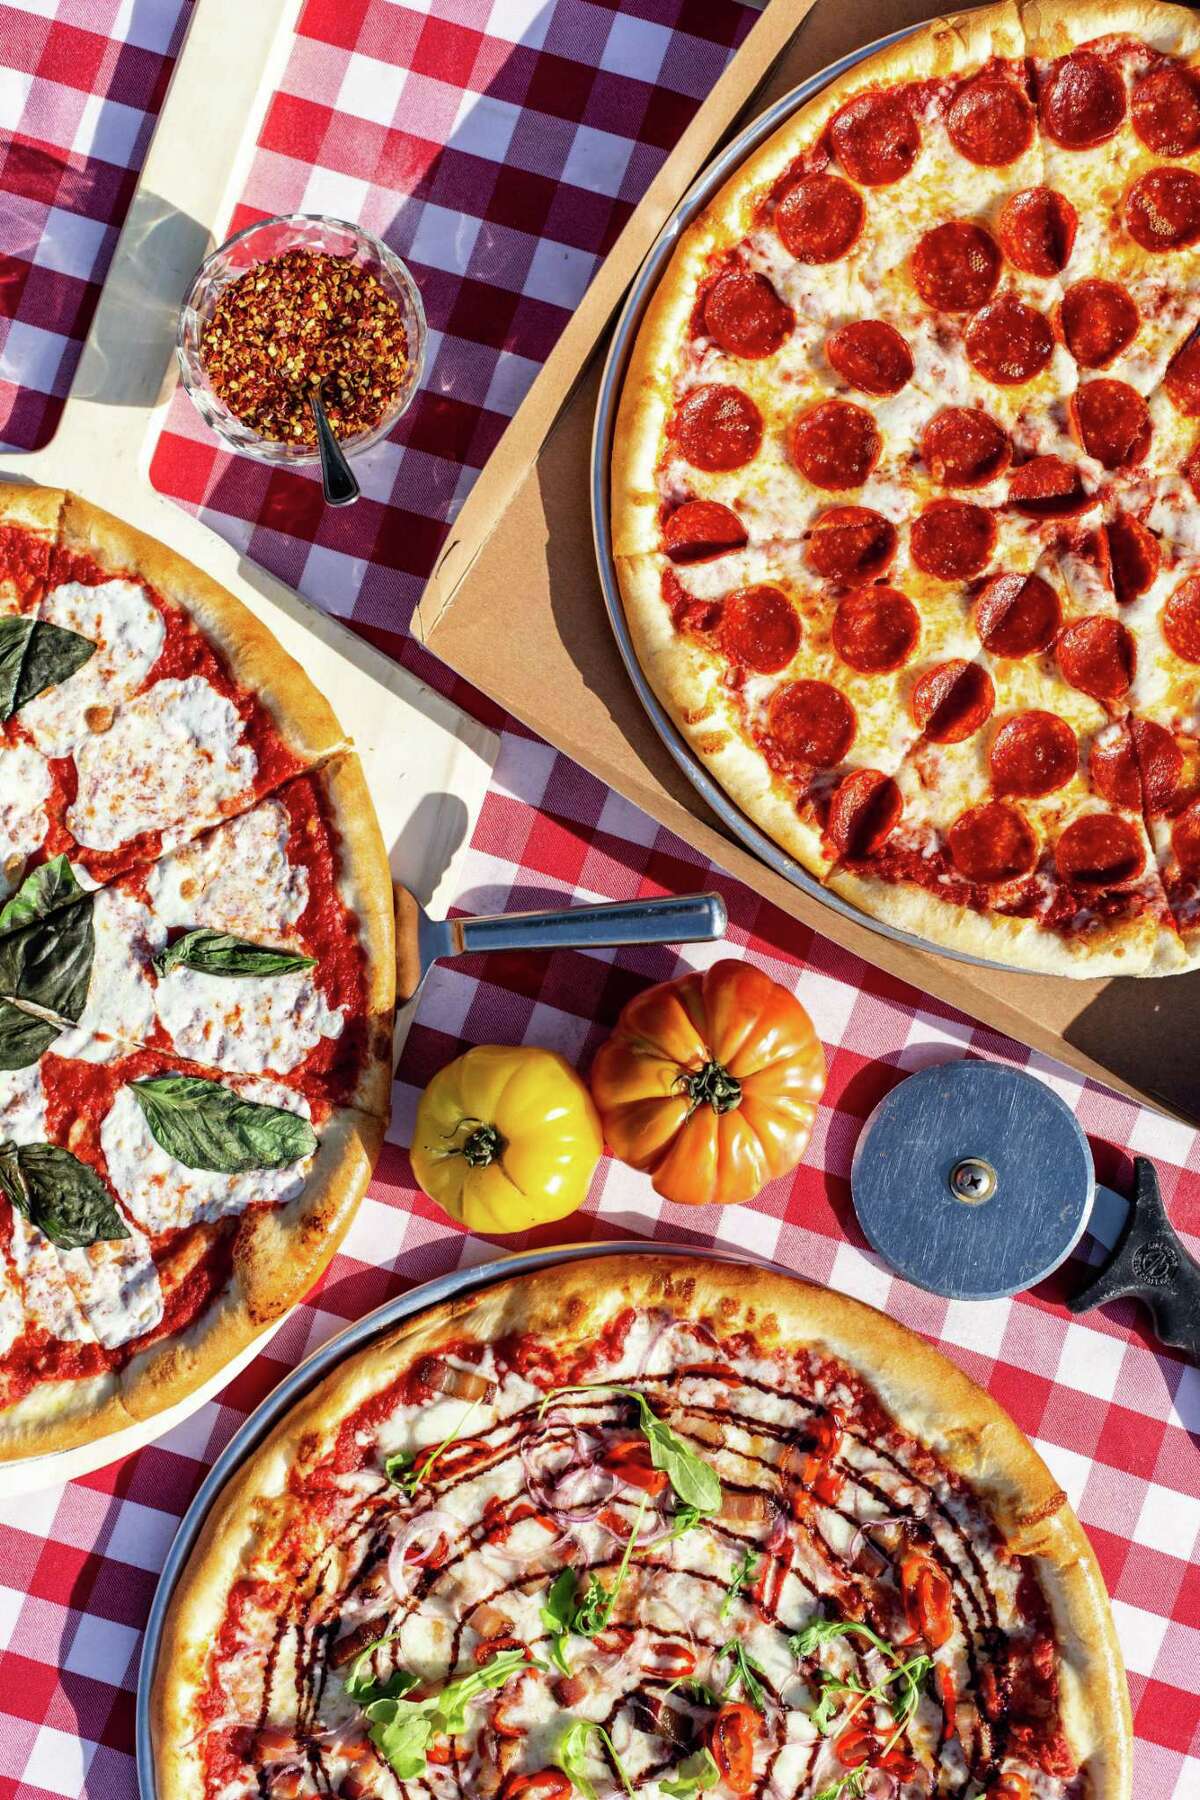 B.B. Italia and B.B. Pizza14795 Memorial Dr. Cheer on your favorite team at B.B. Italia and B.B. Pizza, which share a roof. Order a large pizza and get an order of wings for half-off.